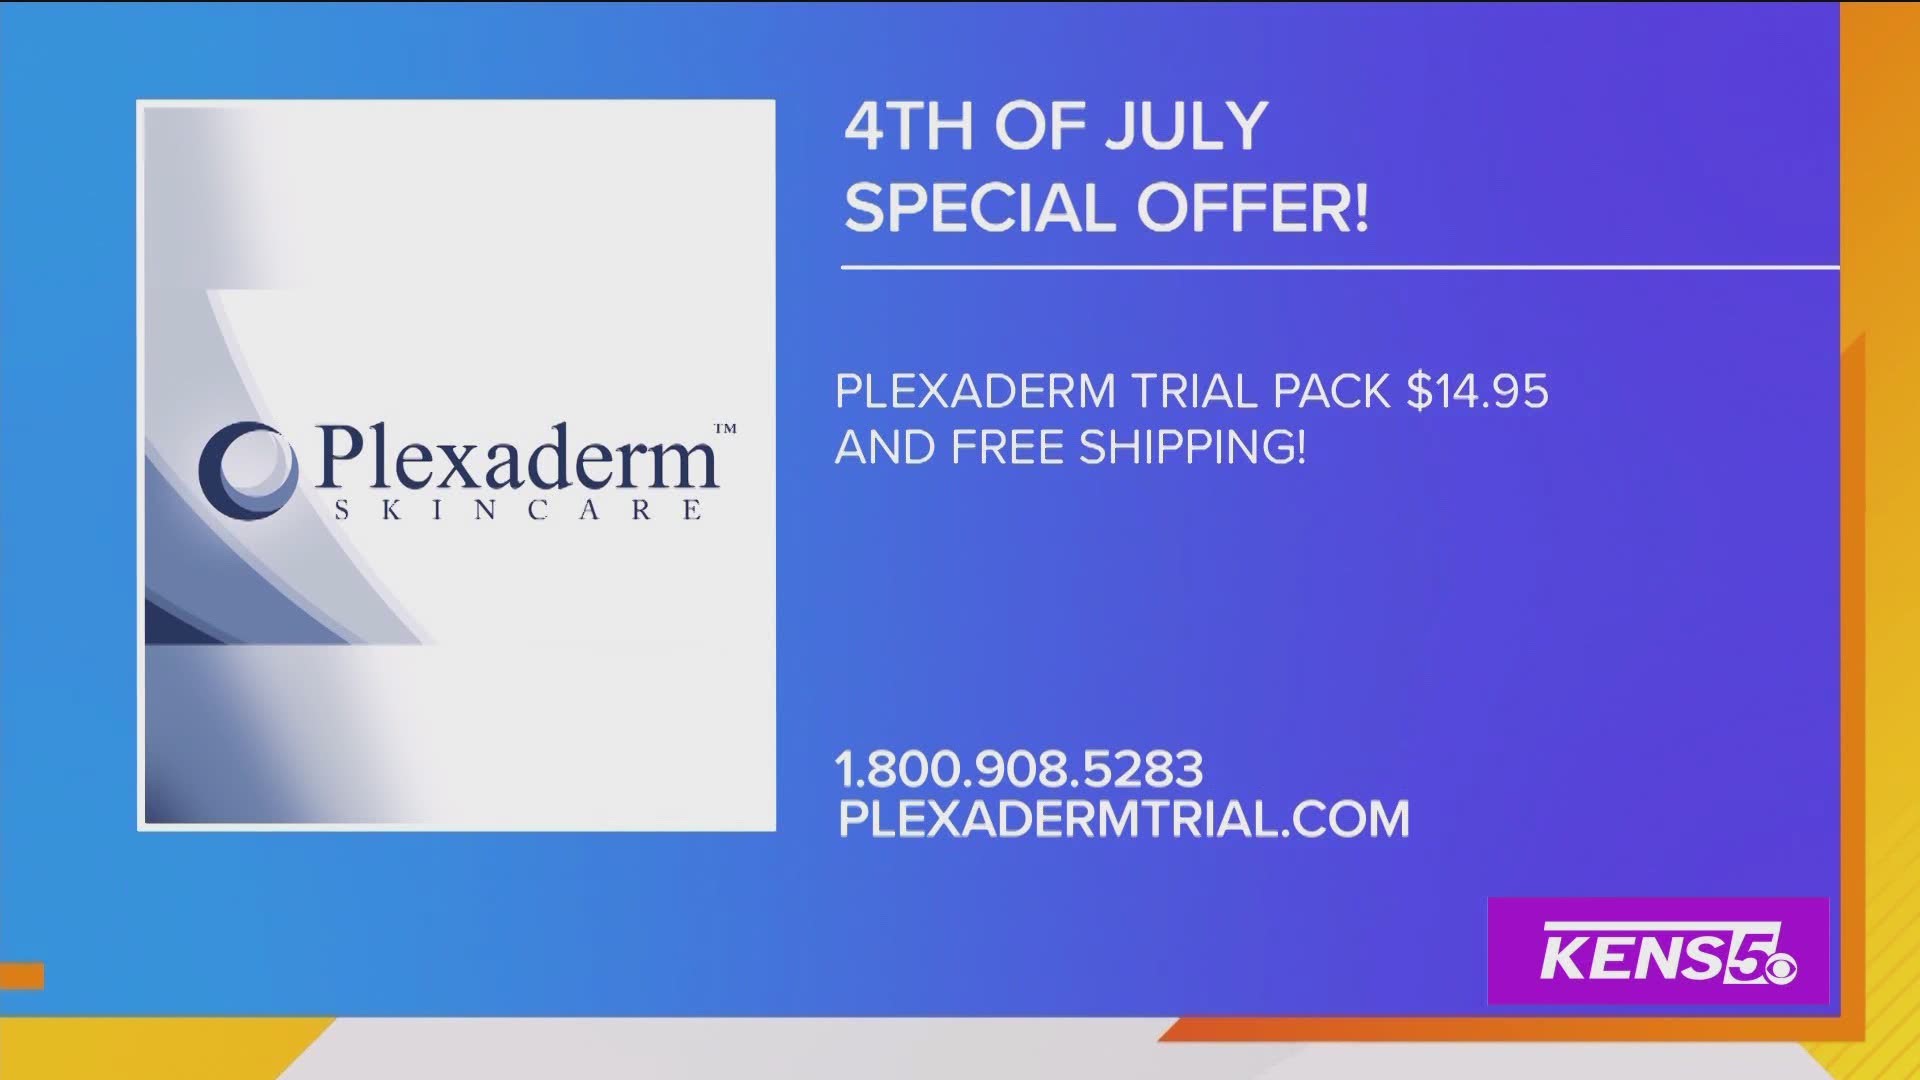 Need a pamper pick-me-up? Plexaderm has a product you can use from the comfort of your home.